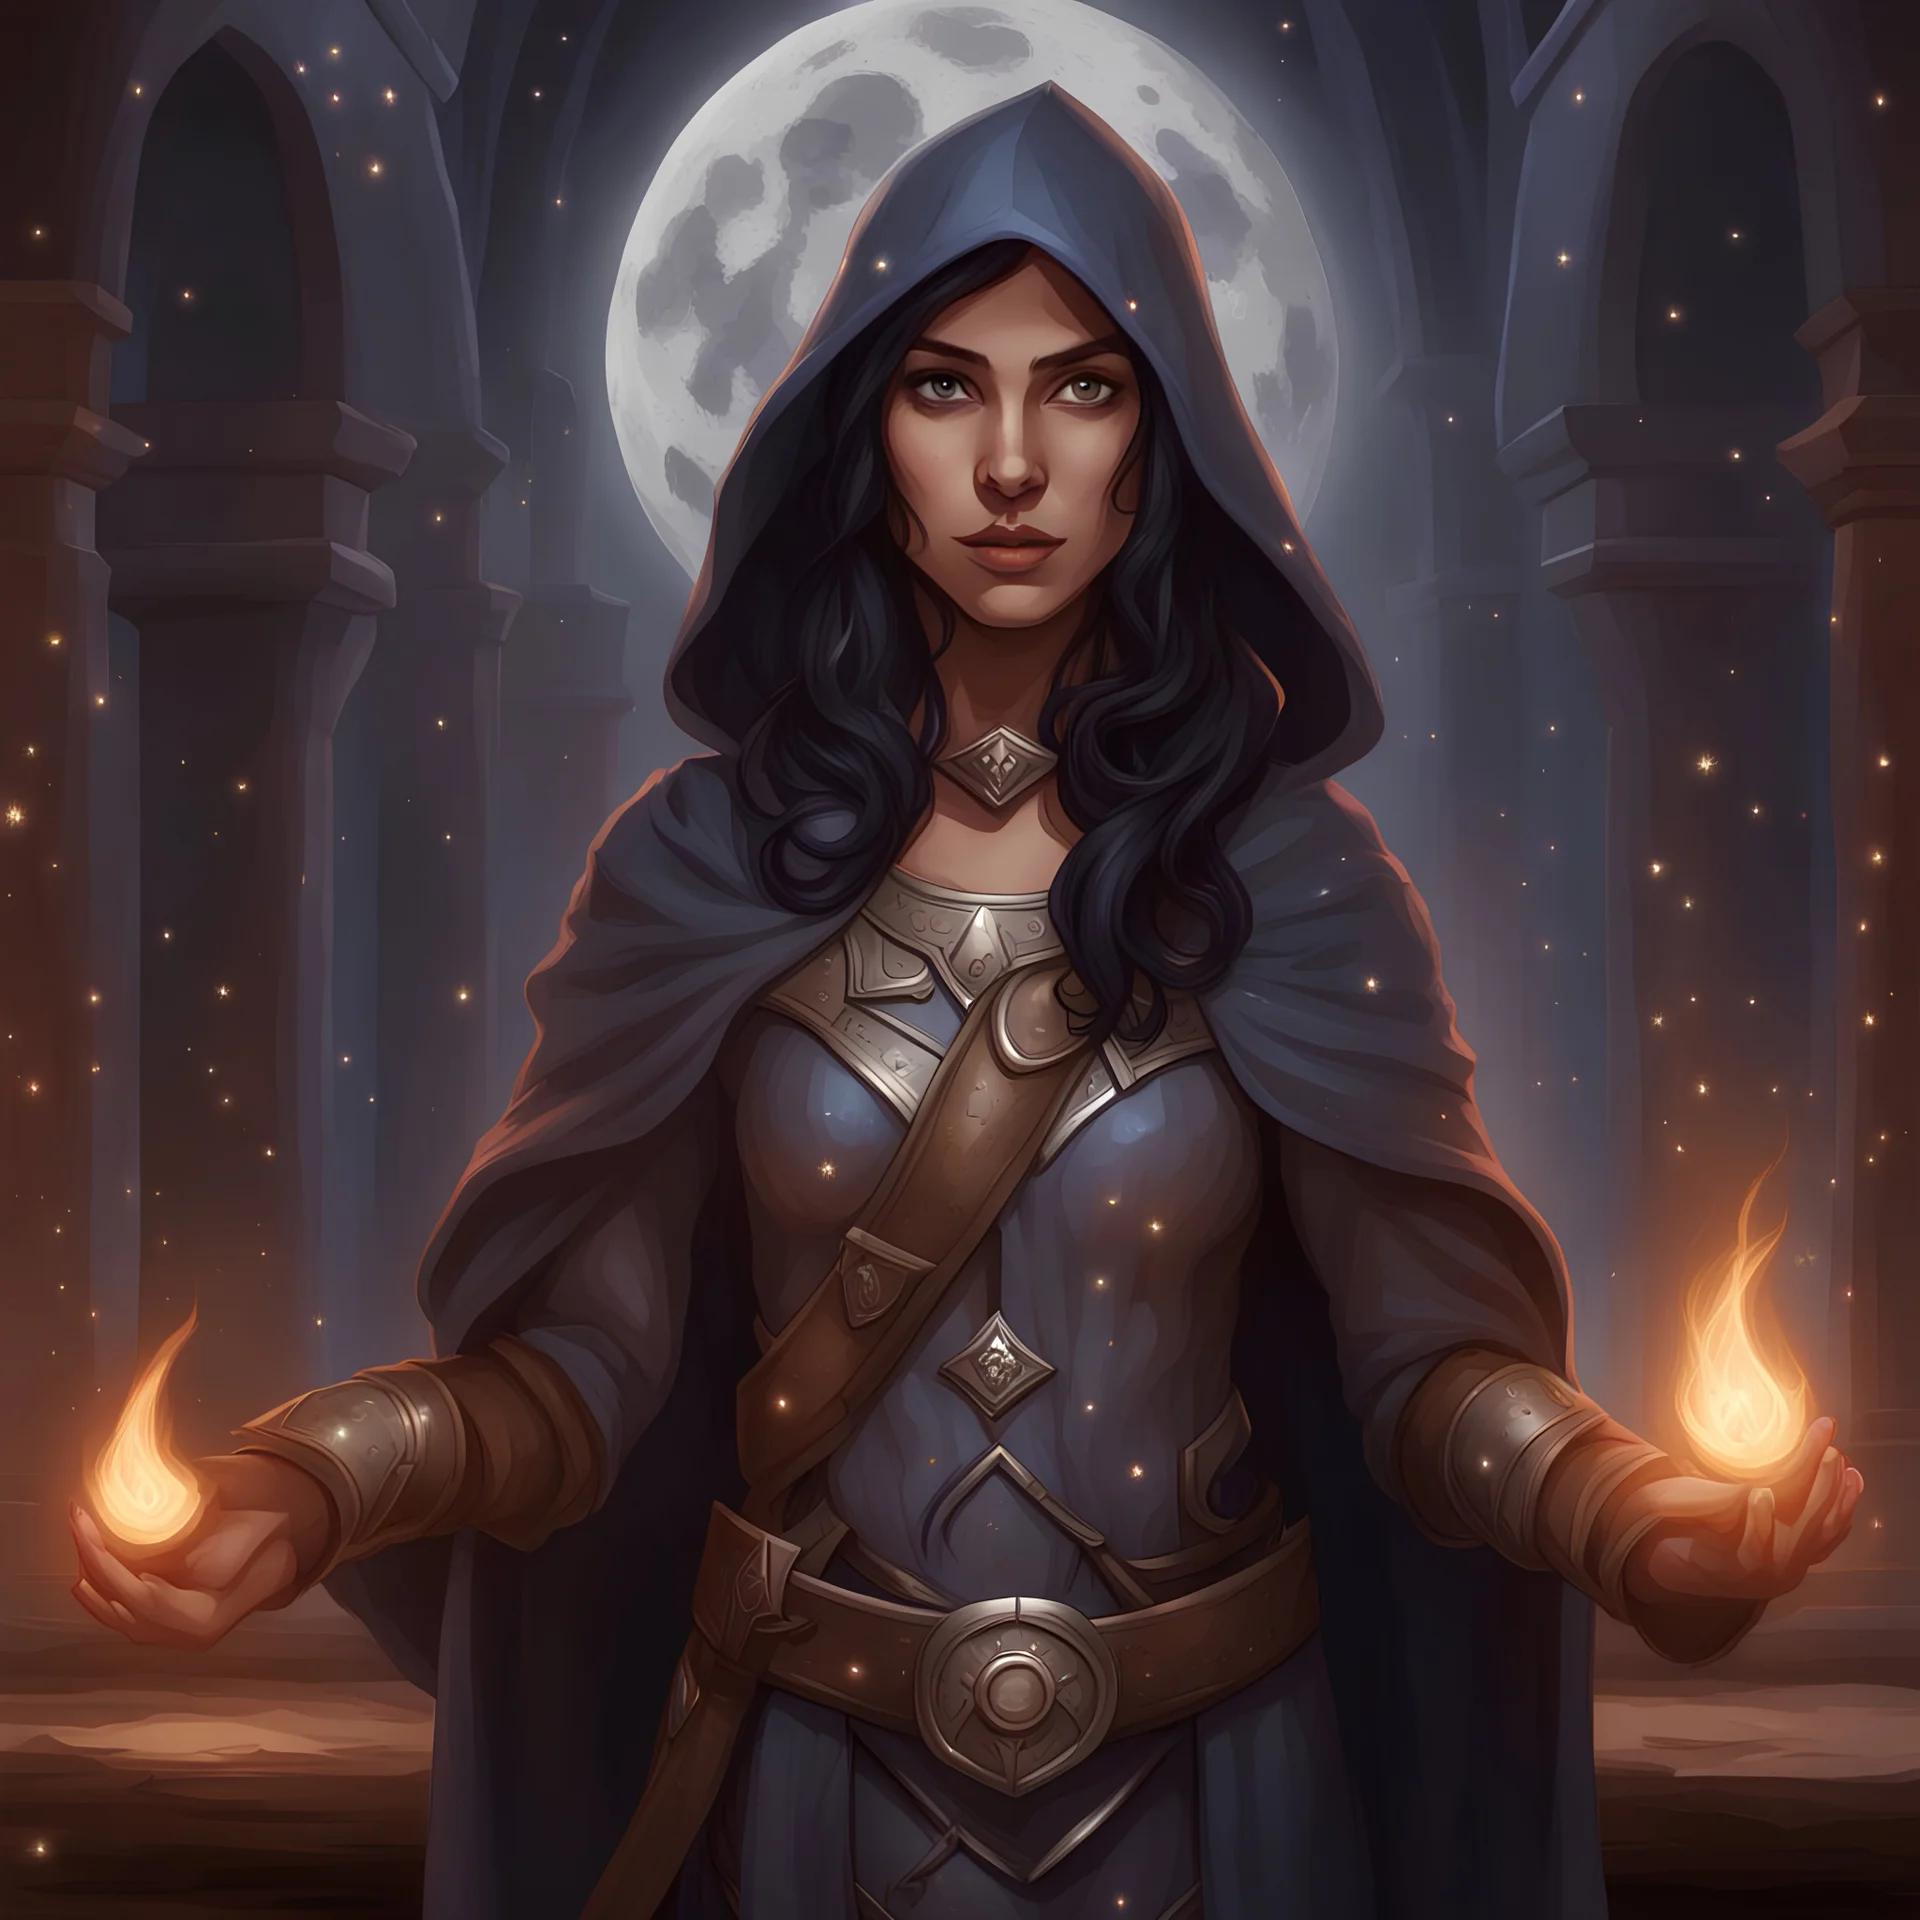 Generate a dungeons and dragons character portrait of a female elf with tan skin and dark hair, who is a cleric of the moon, recolor image in white, silver and slate blue with a starry celestial theme